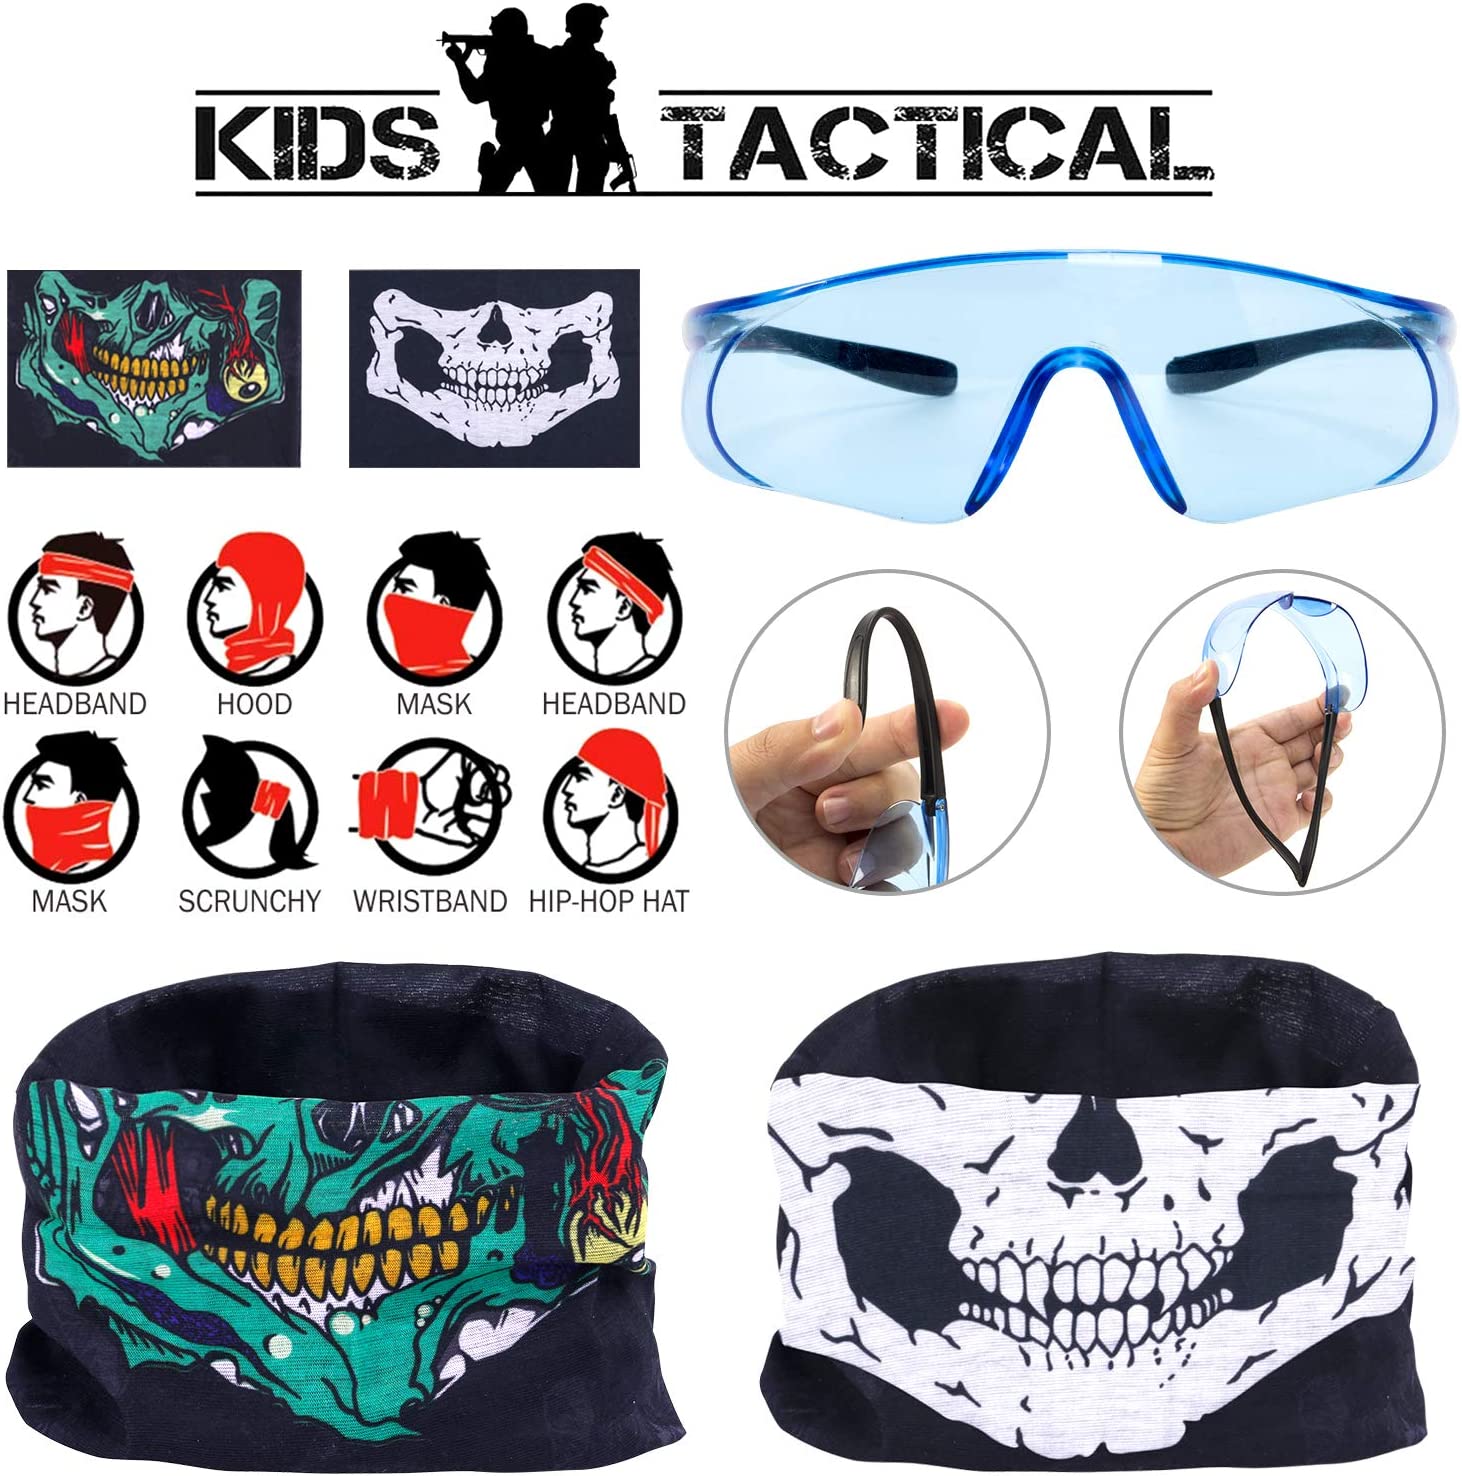 Kids Tactical Vest Kit 2 Pack Compatible with Nerf Guns N-Strike Elite Series with 120 Pcs Refill Darts, 2 Reload Clips, 2 Face Masks, 2 Wrist Bands, 2 Dart Pouchs, 2 Protective Glasses